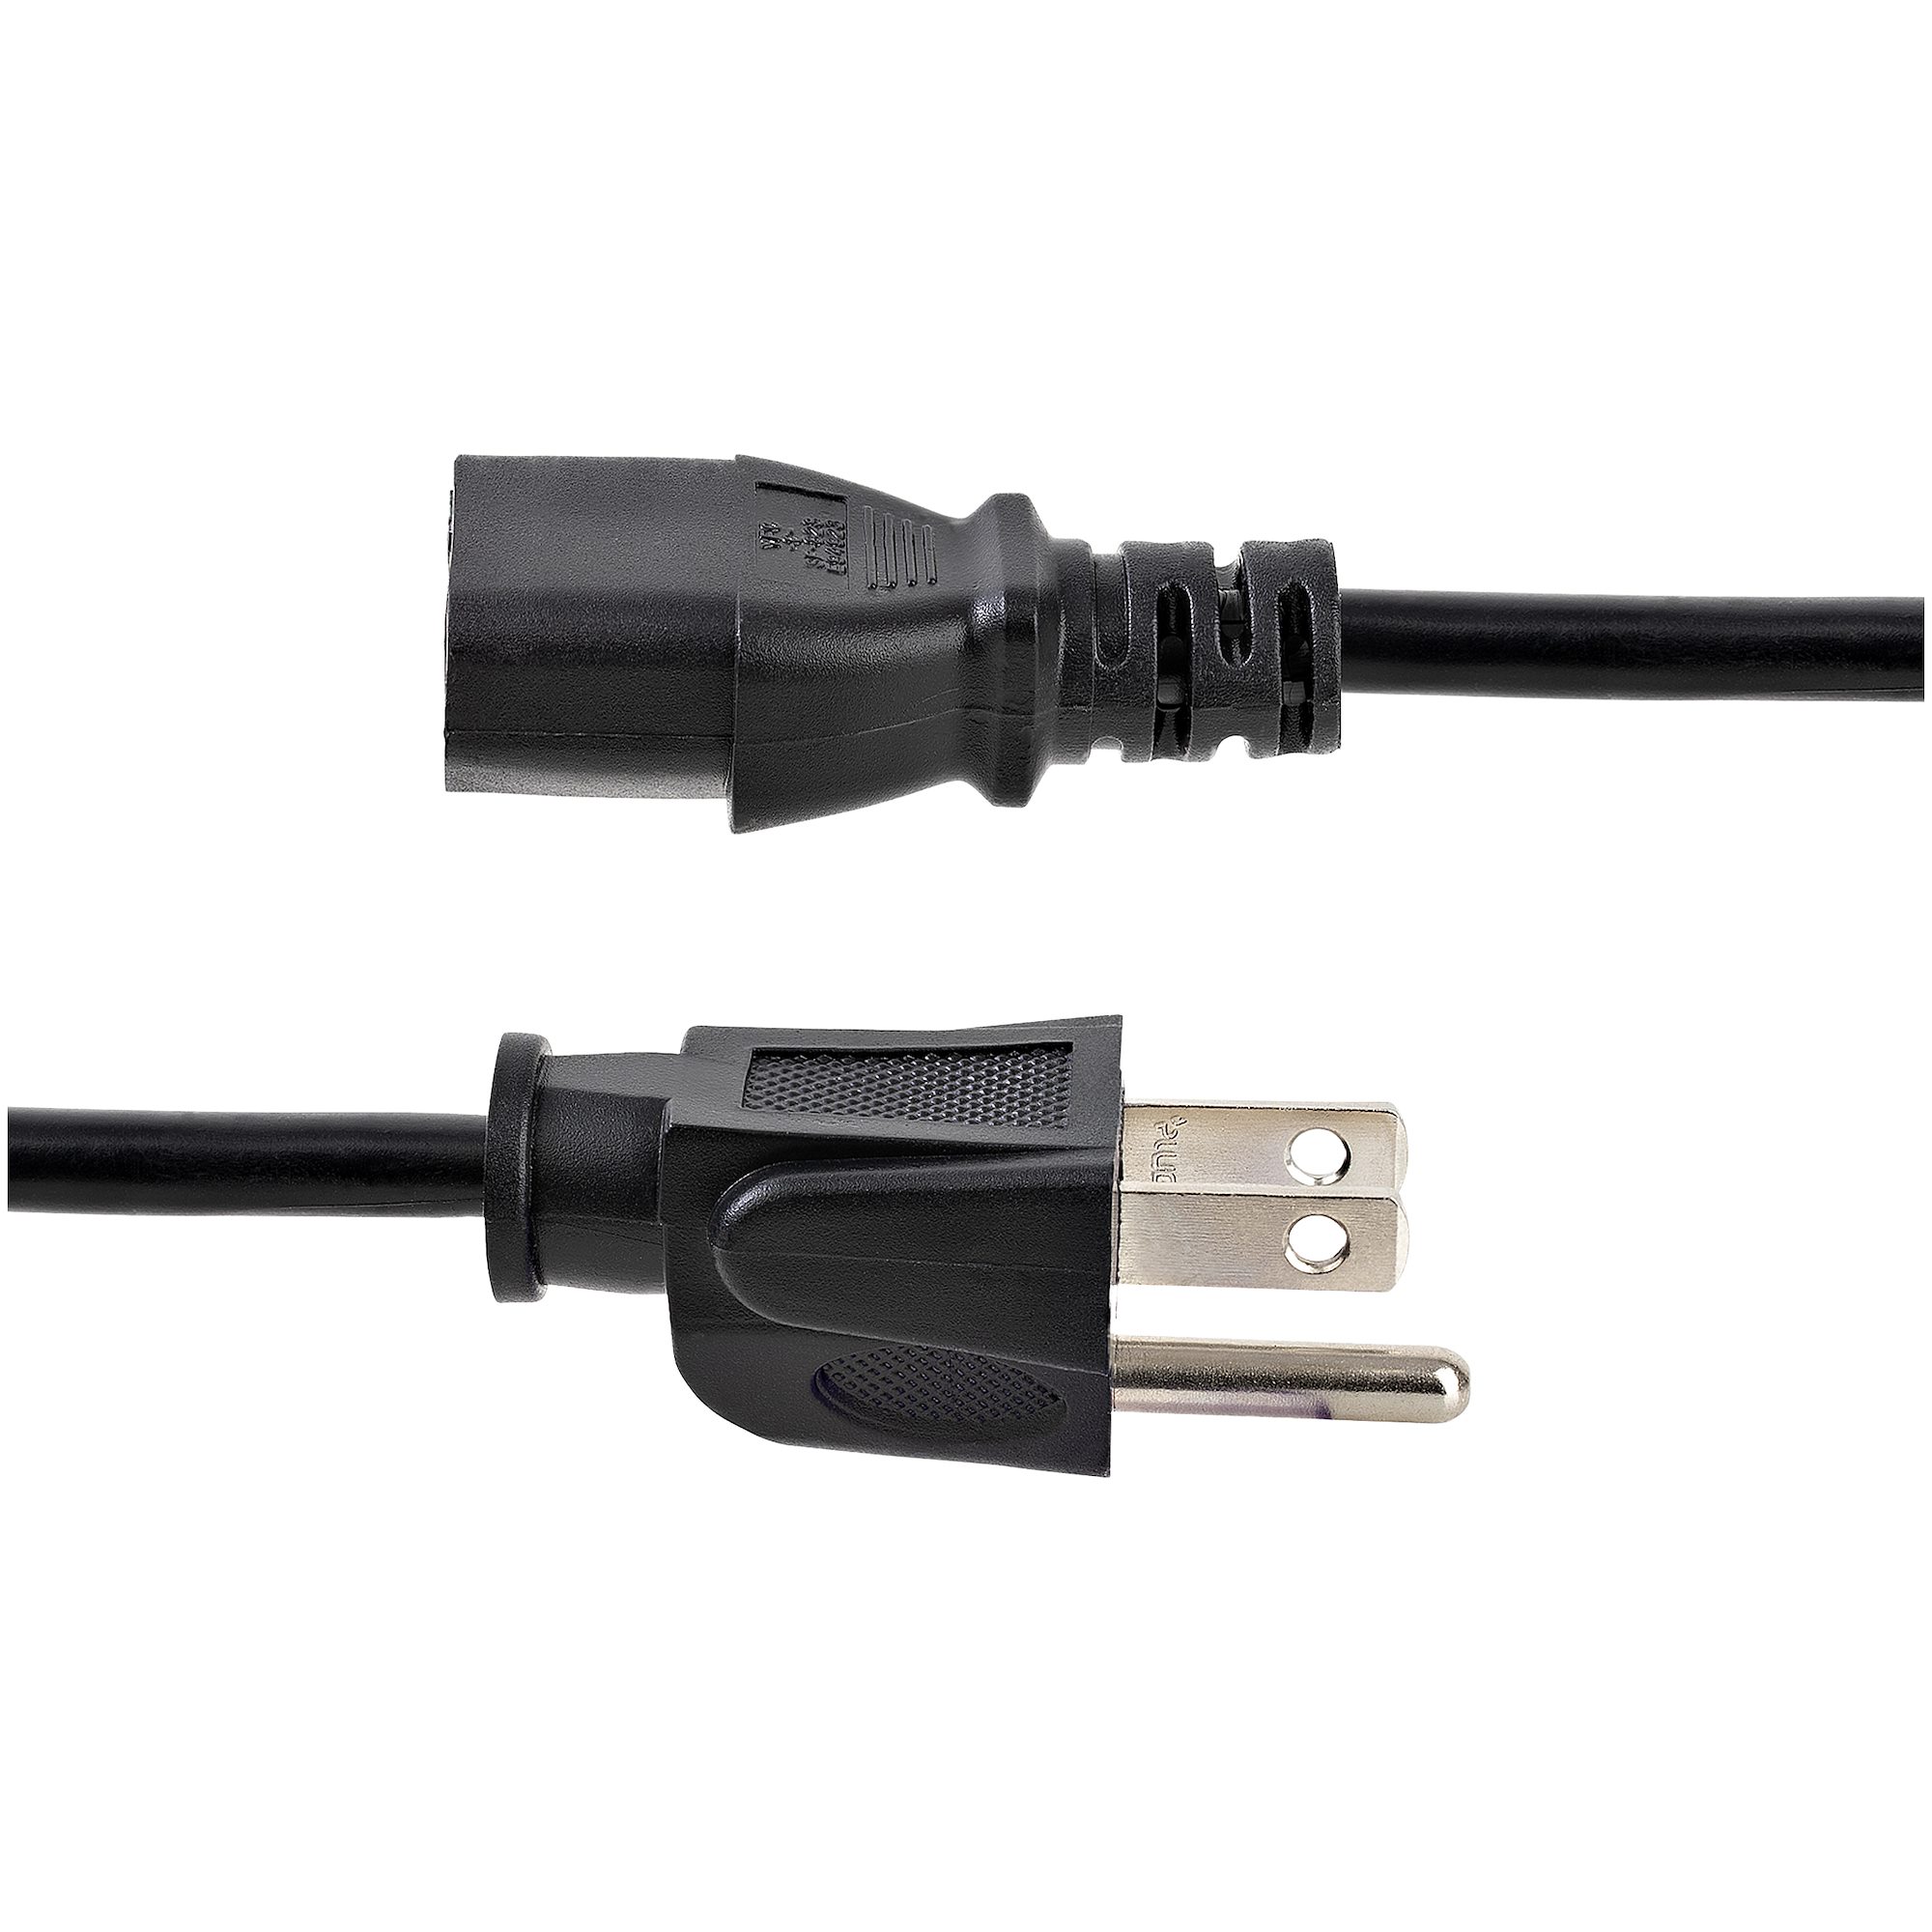 15ft long 18awg Standard Power Cord/Cable/Wire Computer/TV/PC IEC320 C13 10A 